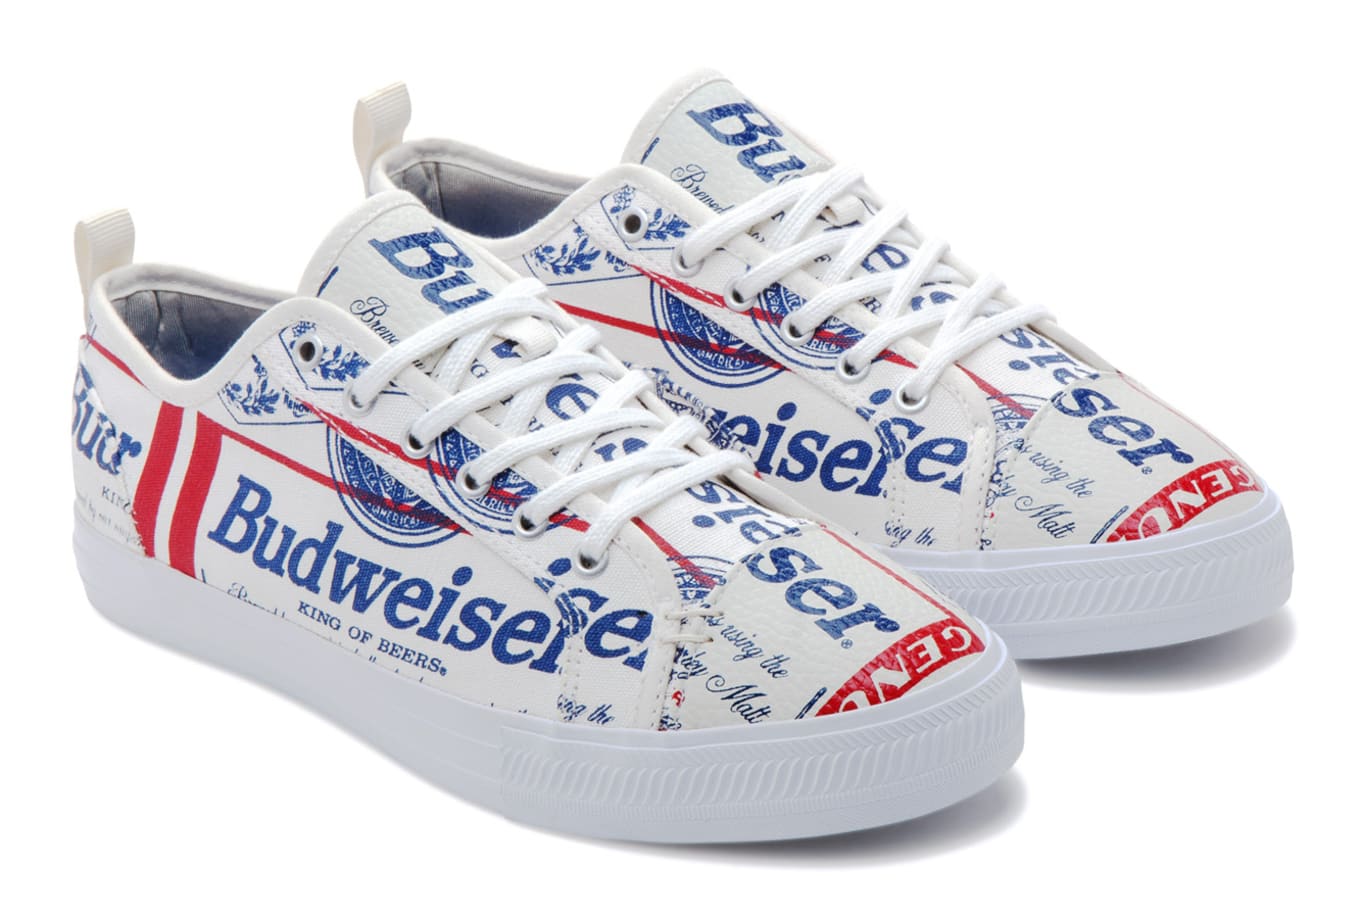 Budweiser Greats Made in America Sneakers | Sole Collector